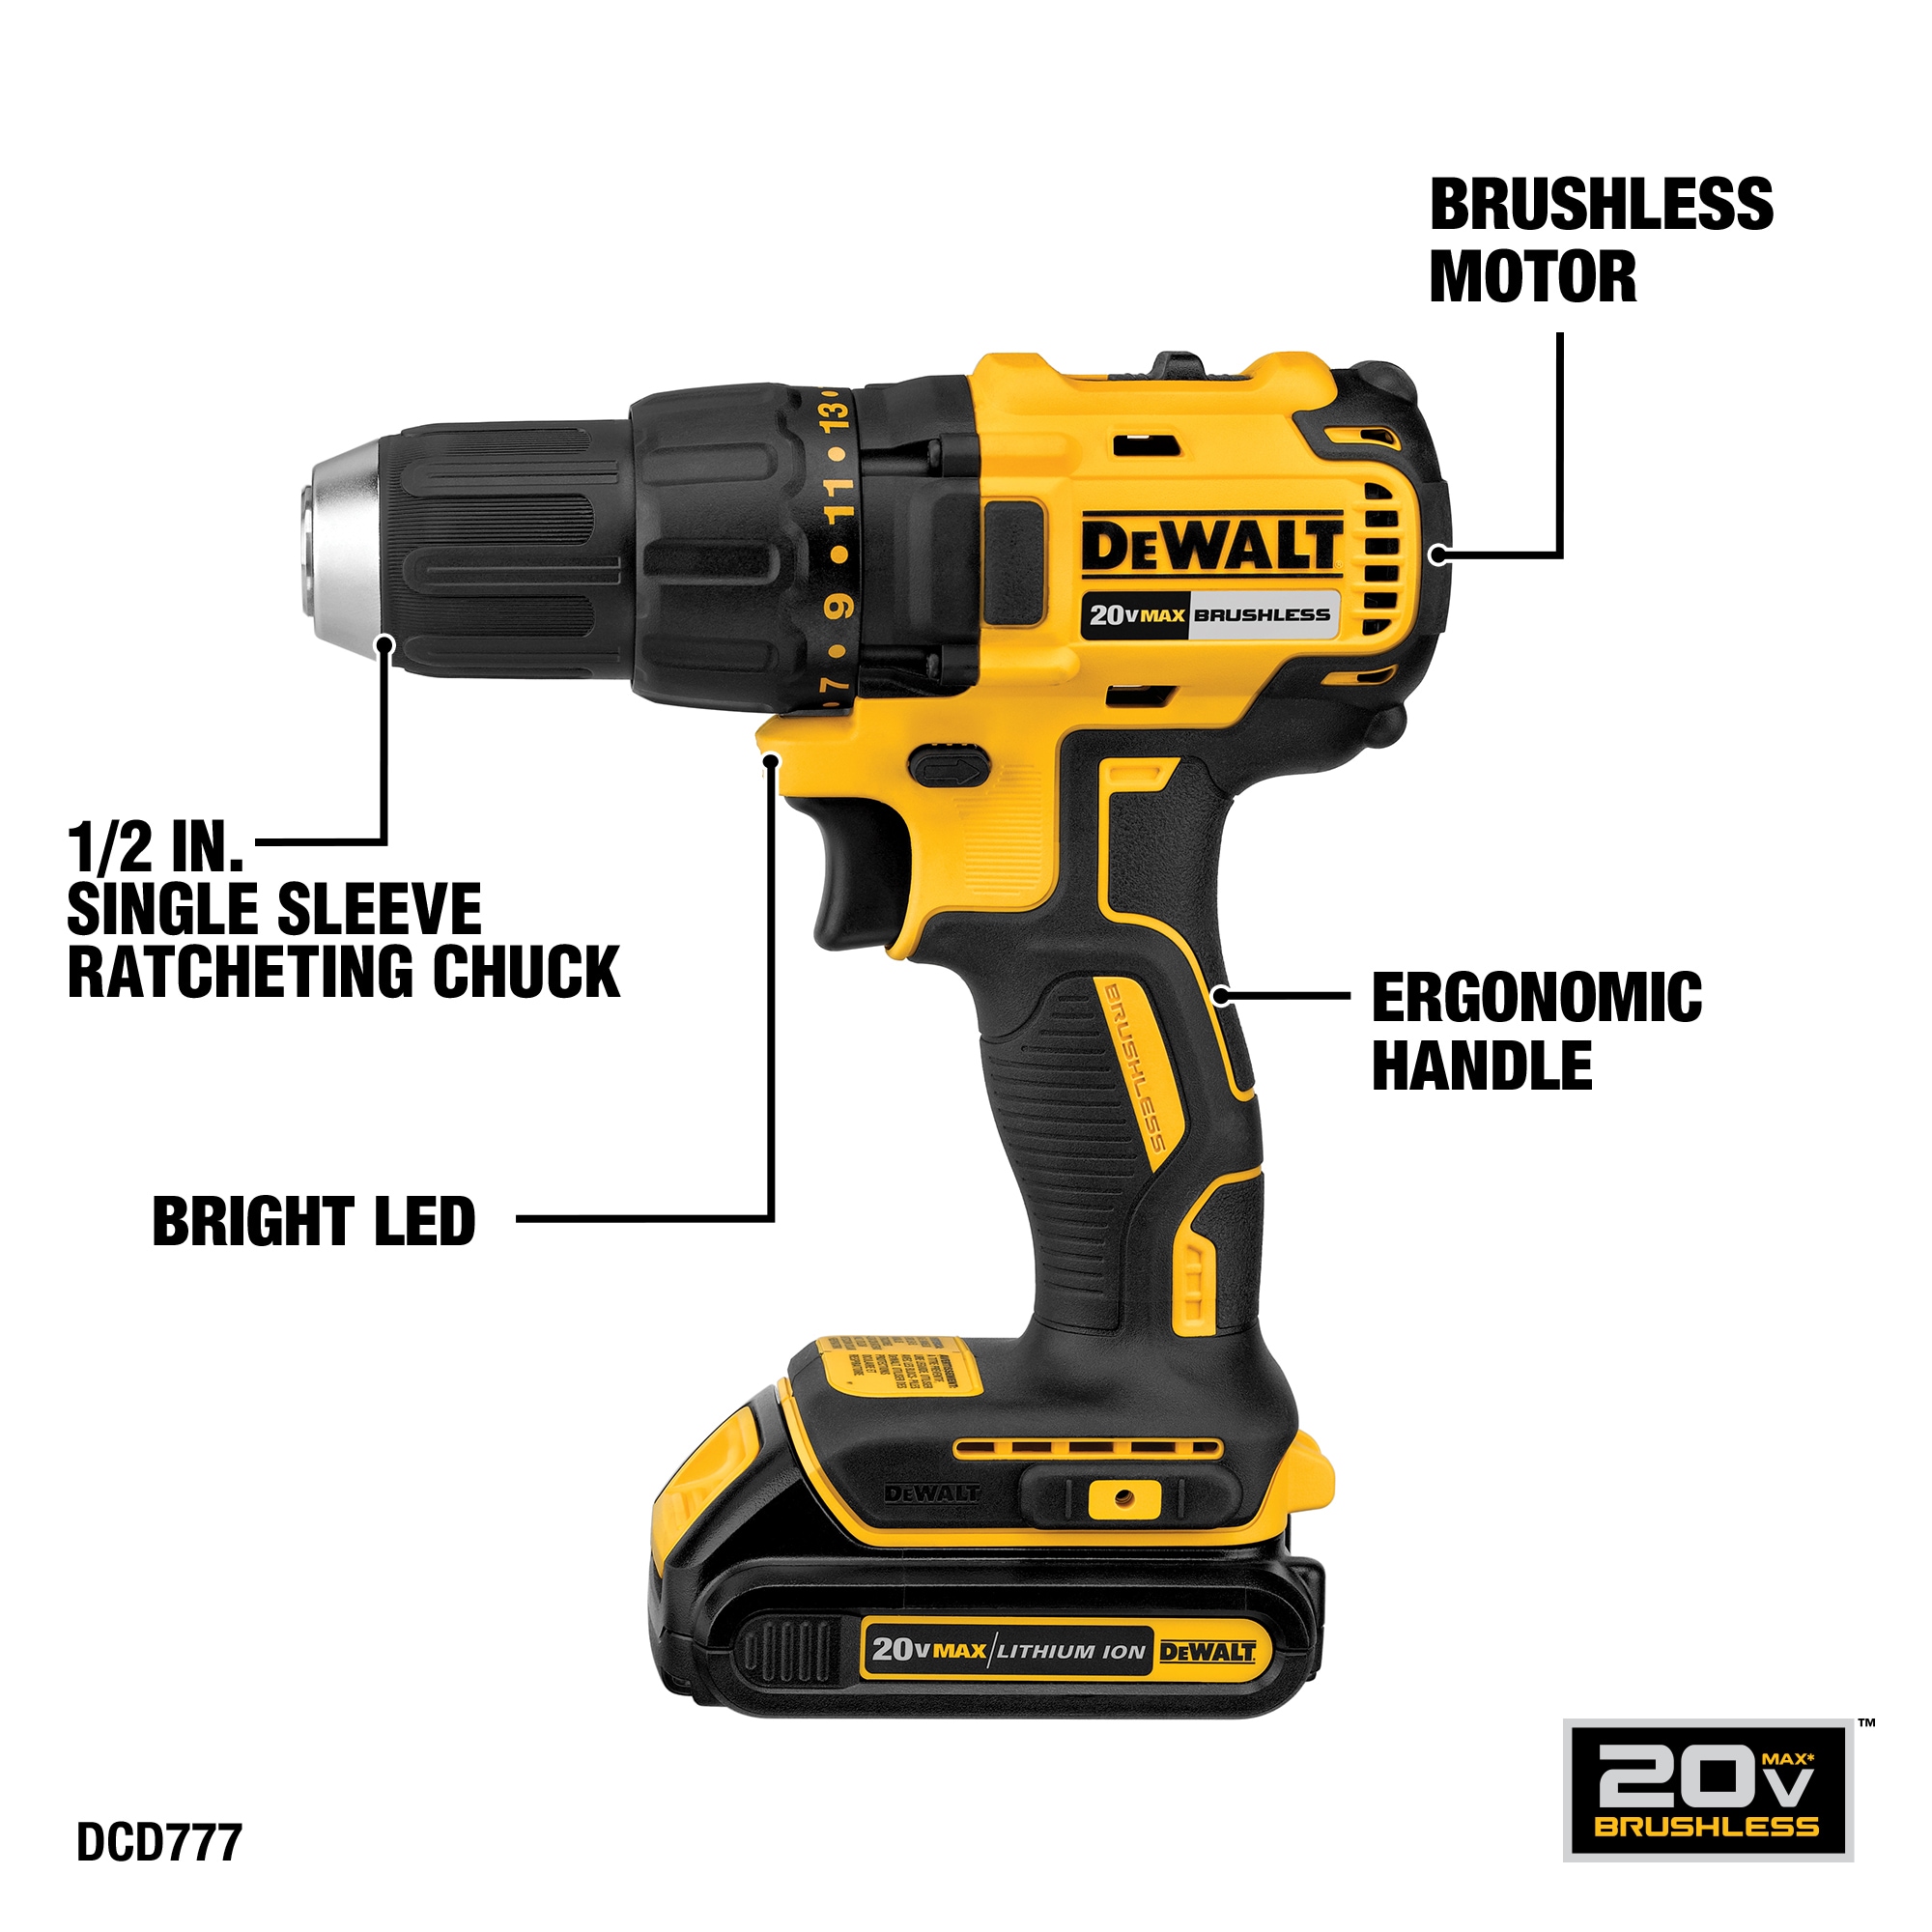 DEWALT 2-Tool 20-Volt Max Brushless Power Tool Combo Kit with